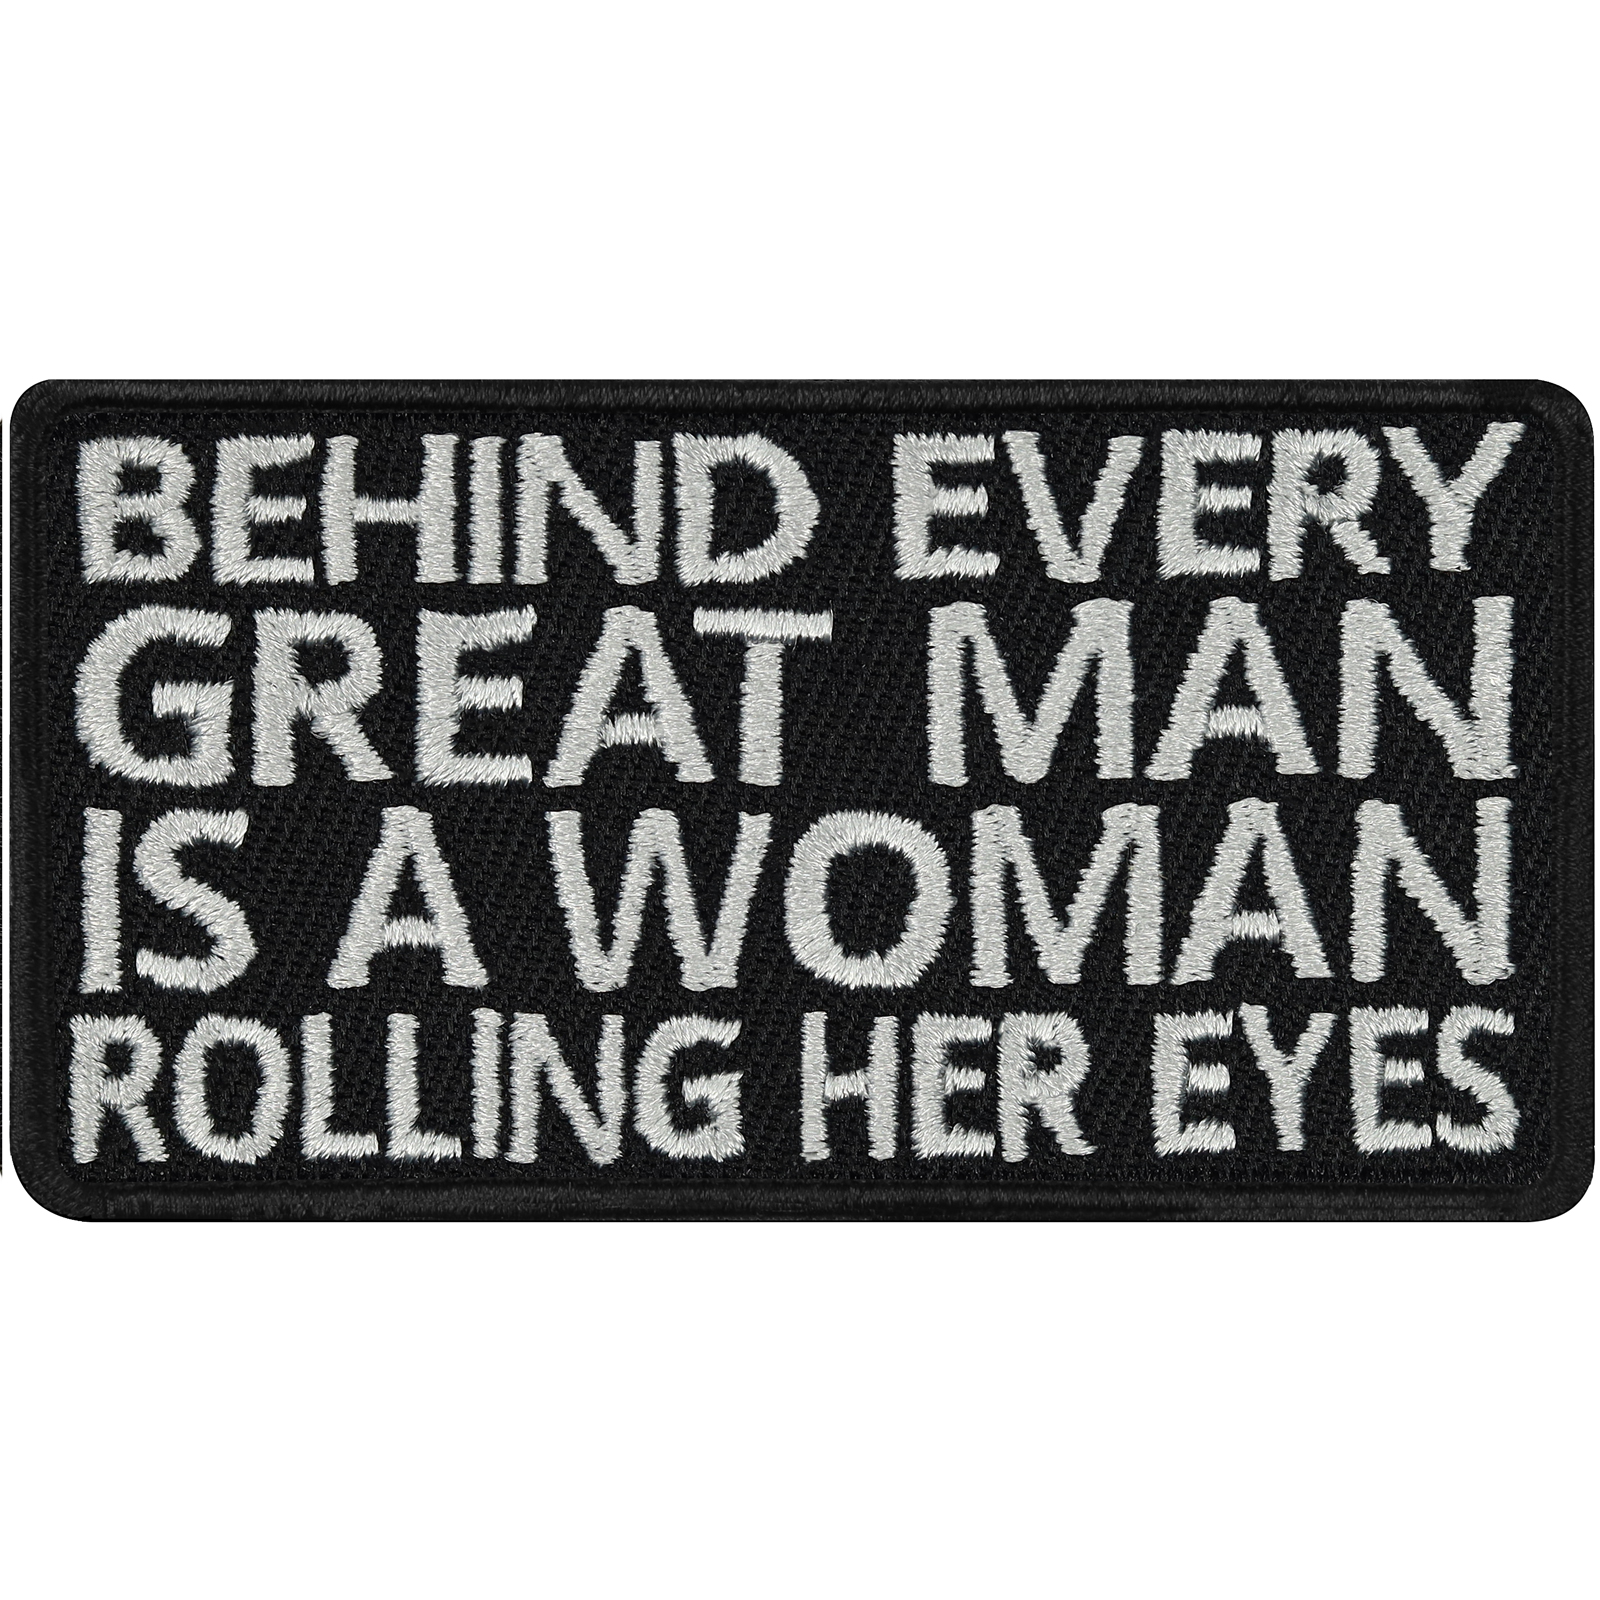 Behind every great man is a woman rolling her eyes - Patch